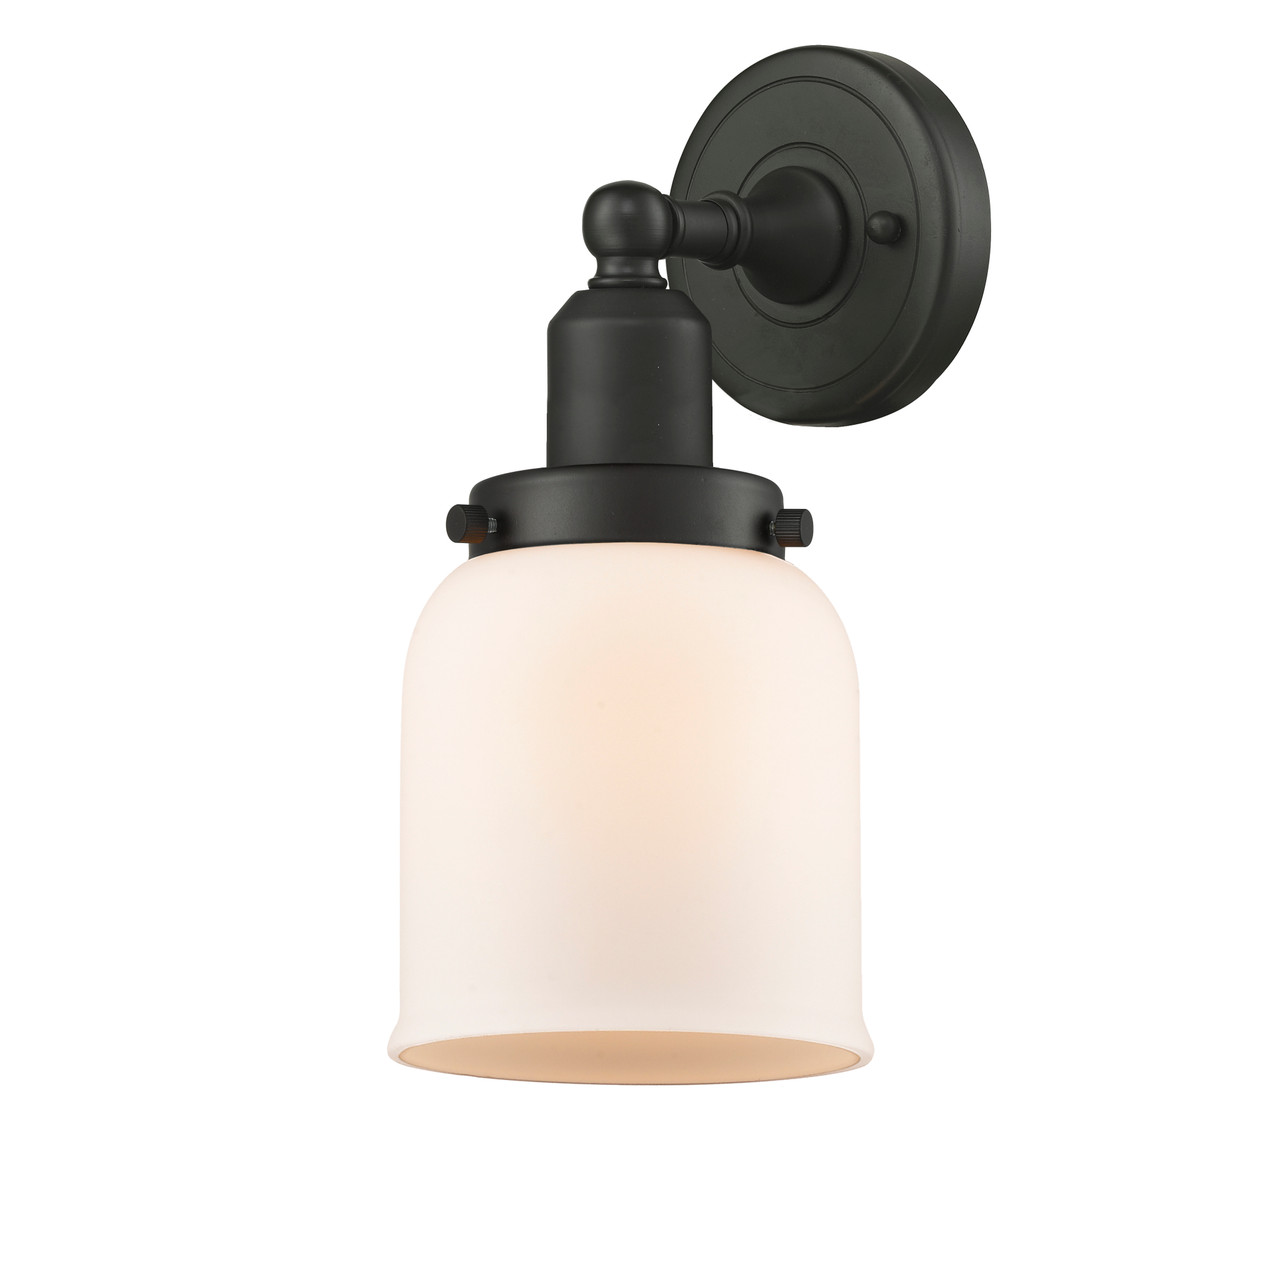 INNOVATIONS 900H-1W-OB-G51 Small Bell 1 Light Bath Vanity Light part of the Austere Collection Oil Rubbed Bronze